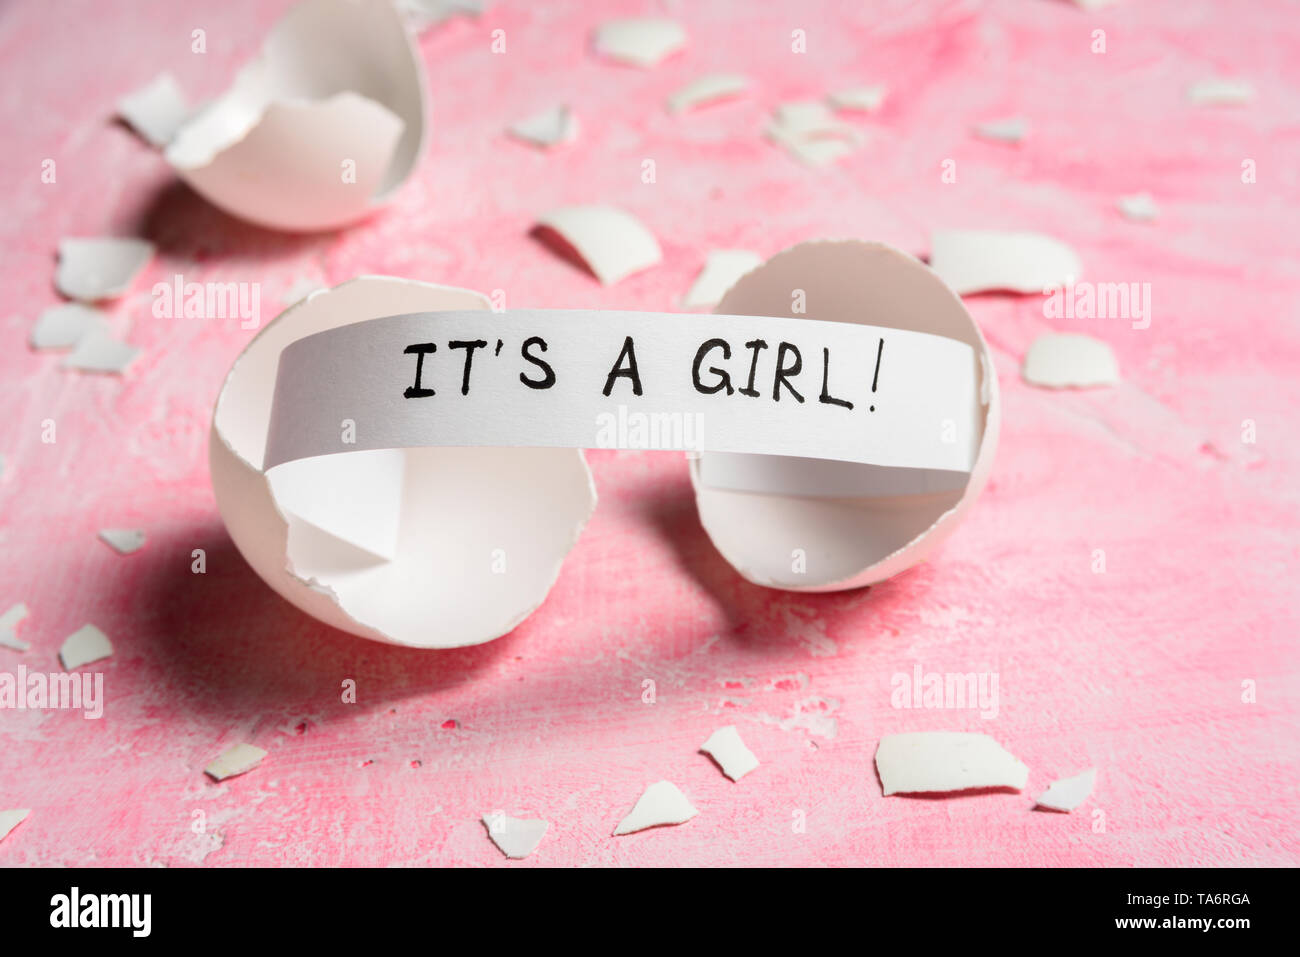 Baby shower concept. Girl, pink. Cracked egg with a message IT'S A GIRL. Like fortune cookies Stock Photo